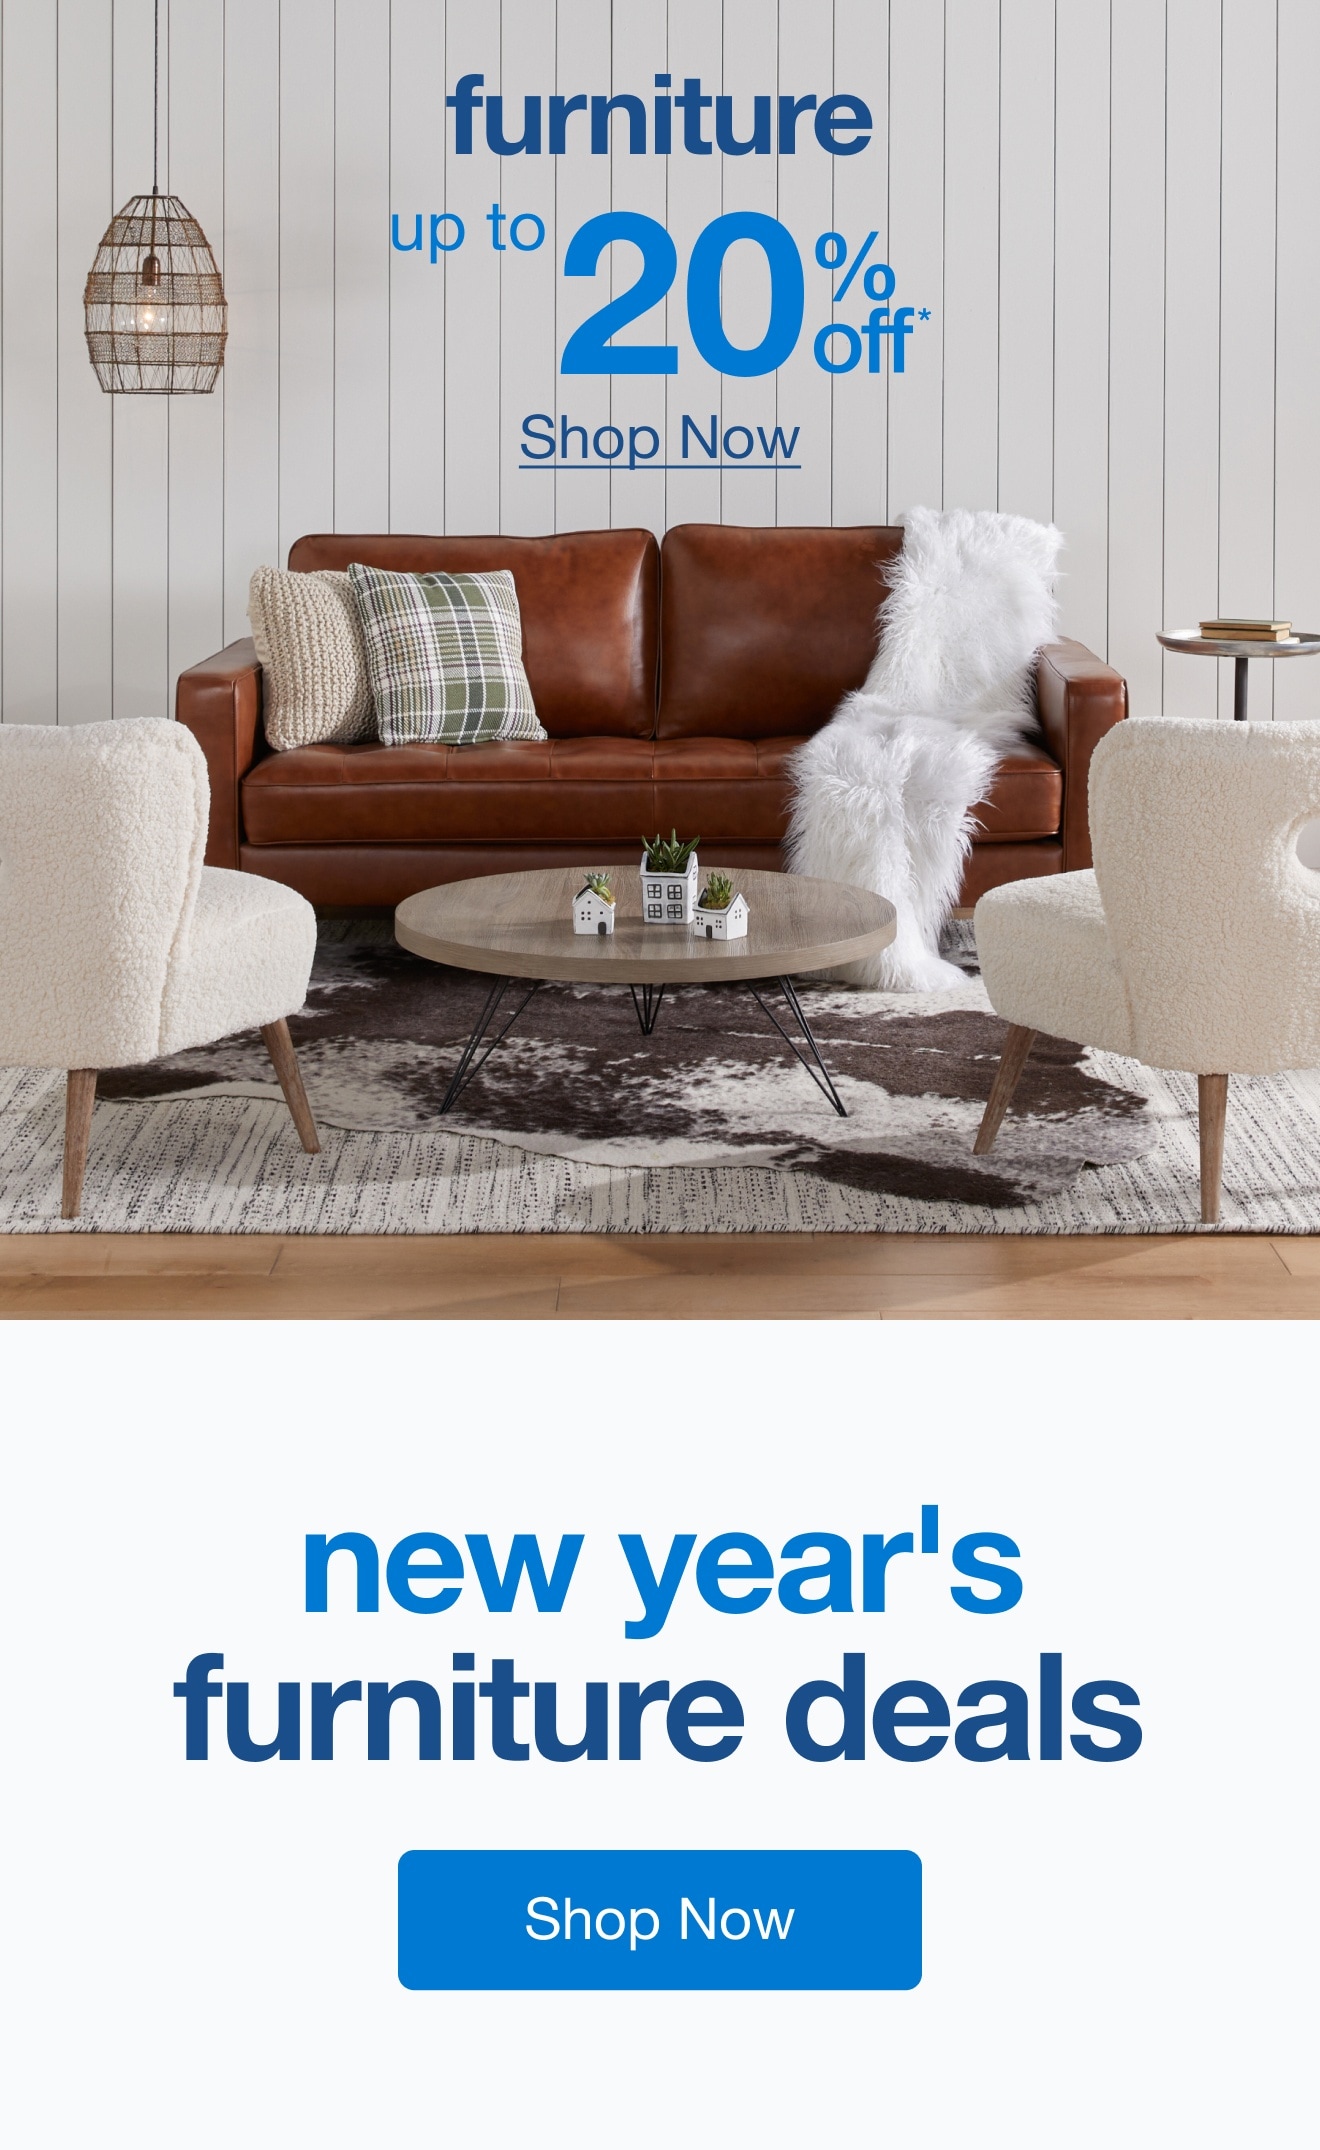 Up to 20% Off* Furniture — Shop Now!